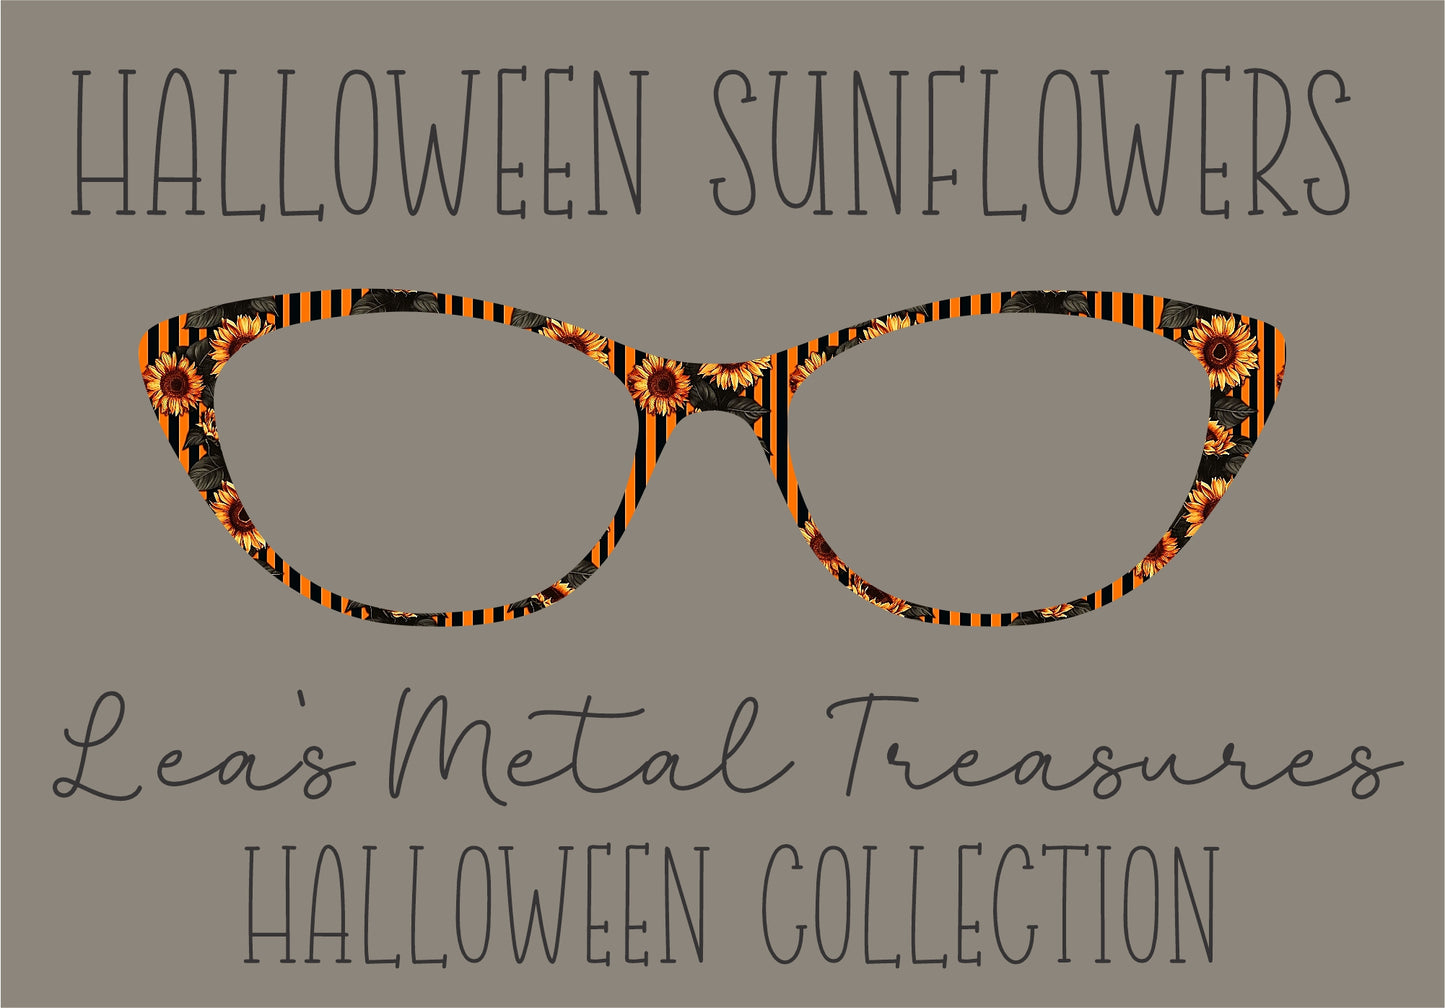 HALLOWEEN SUNFLOWERS Eyewear Frame Toppers COMES WITH MAGNETS